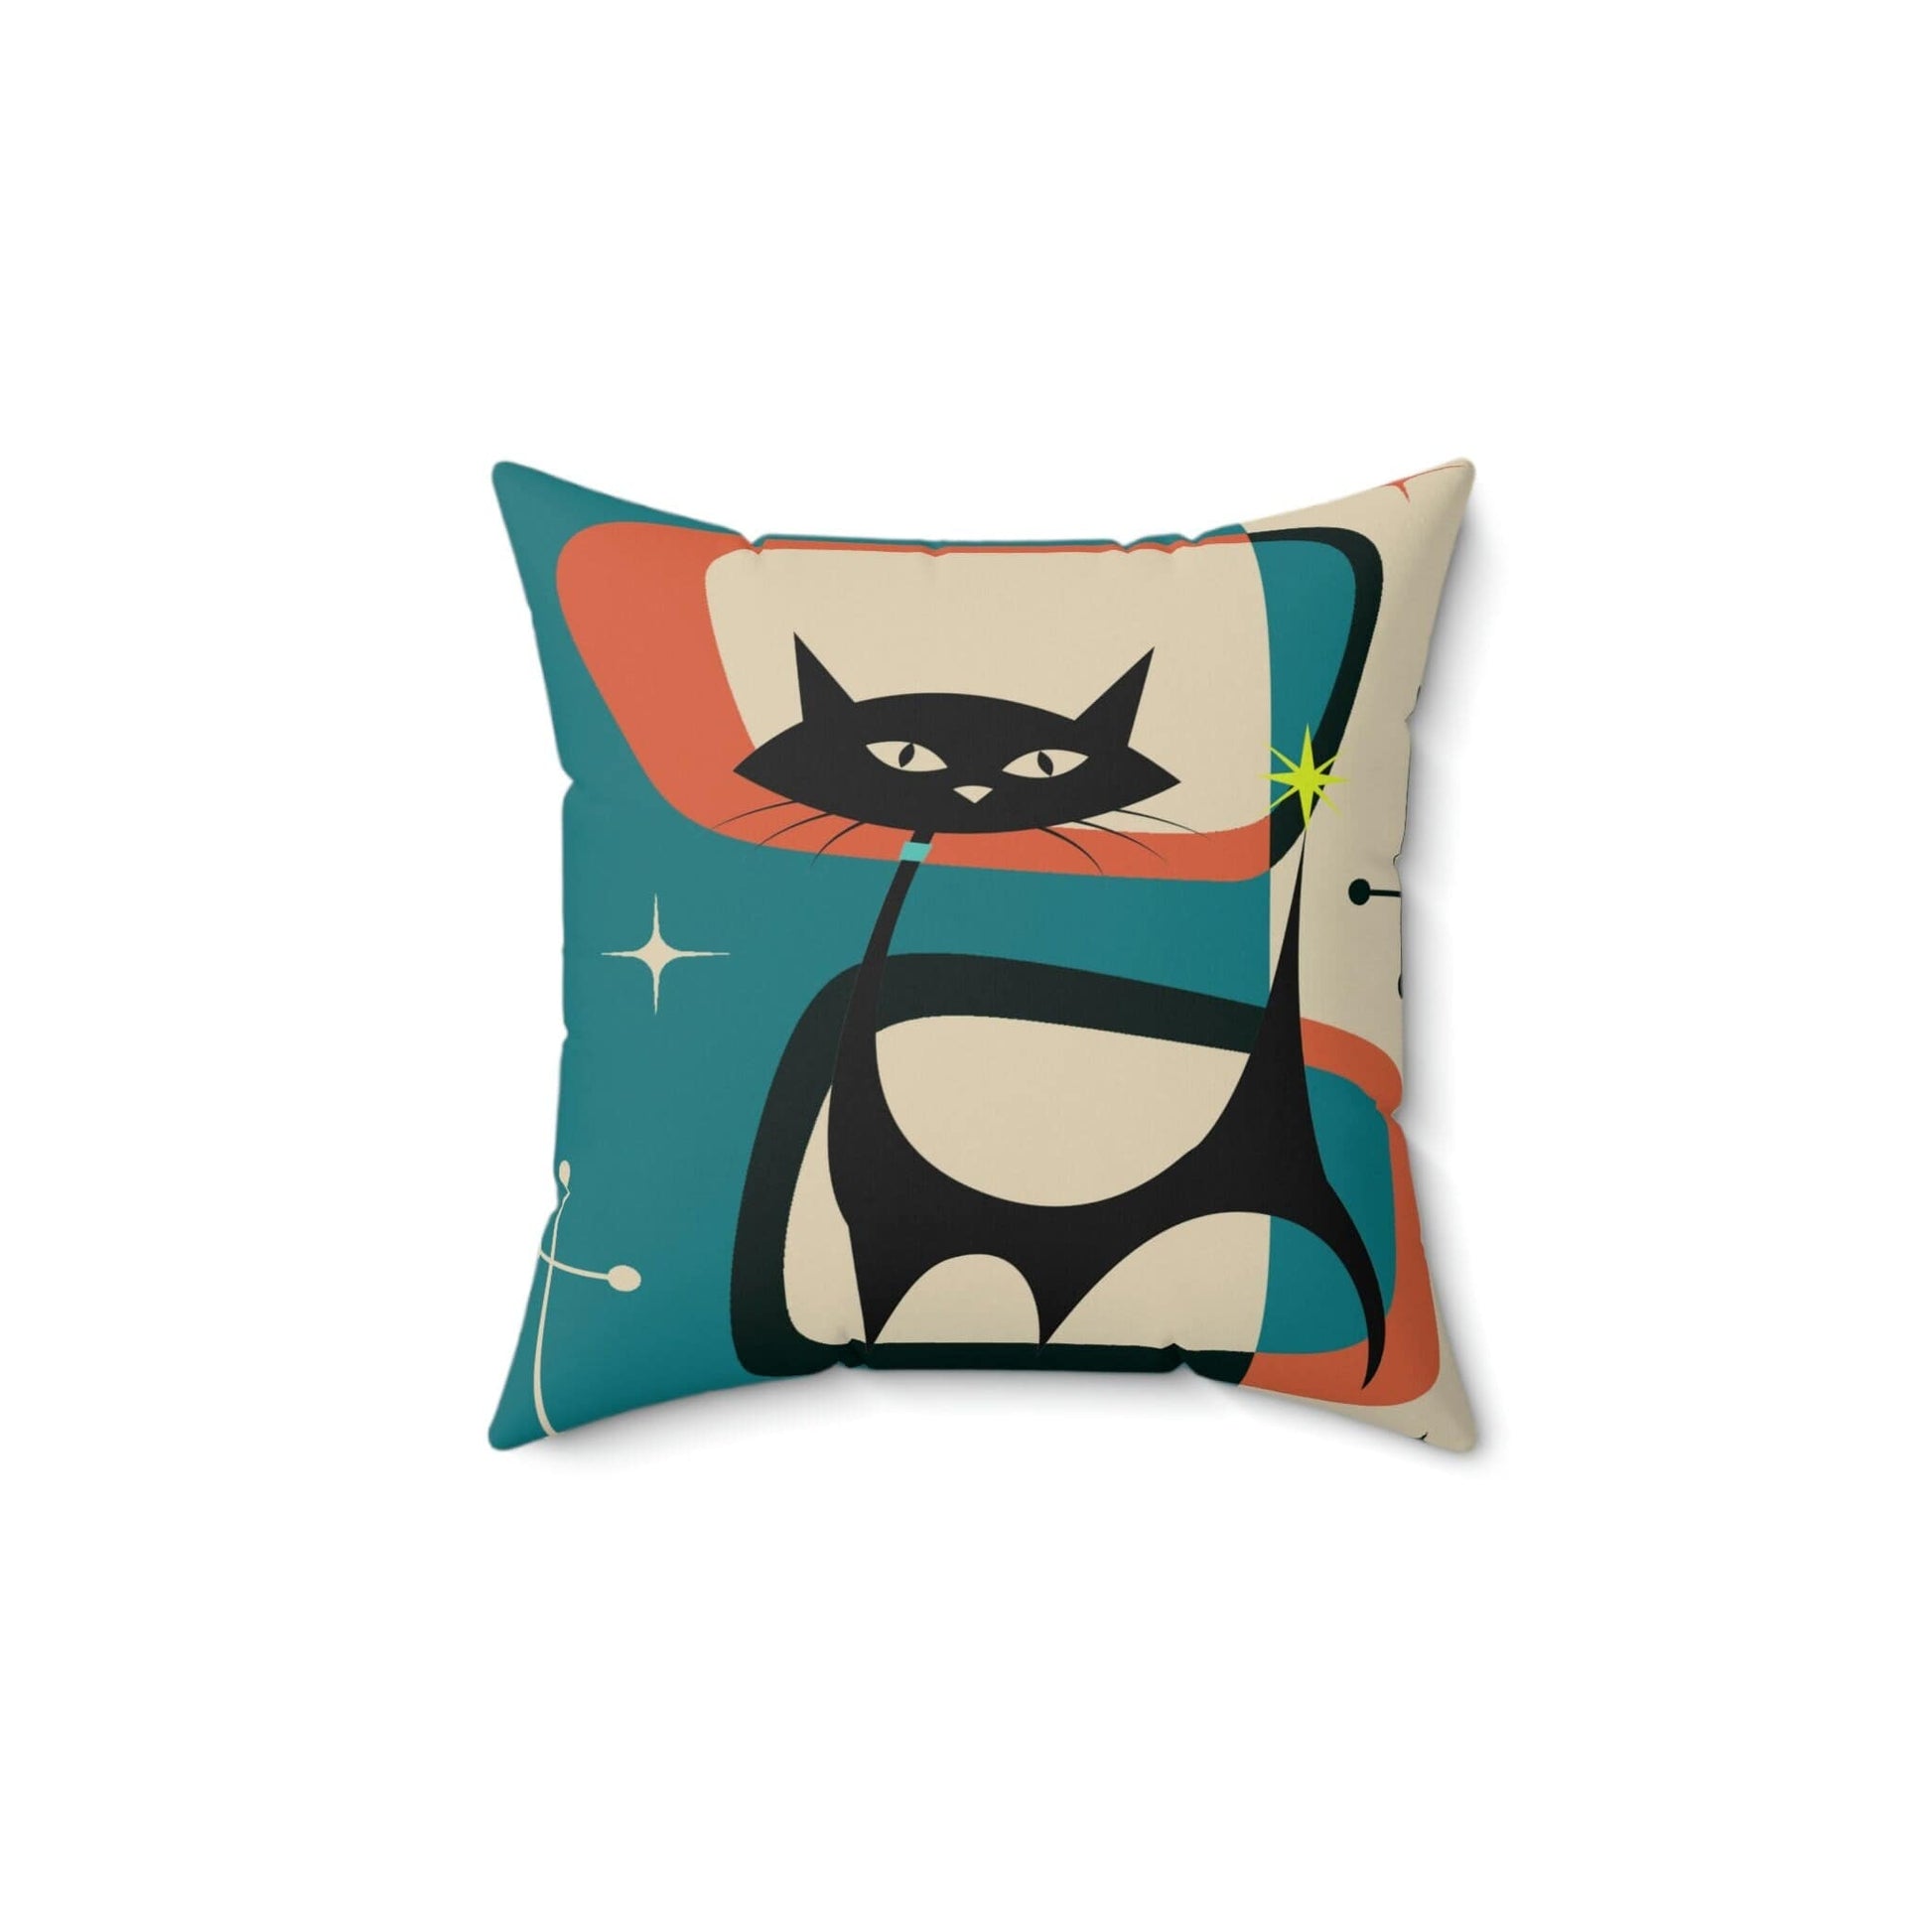 Kate McEnroe New York Retro Atomic Black Cat Throw Pillow Cover, Teal Blue, Cream, Burnt Orange Mid Century Modern Accent Cushion Cover, MCM Square Pillow Case Throw Pillow Covers